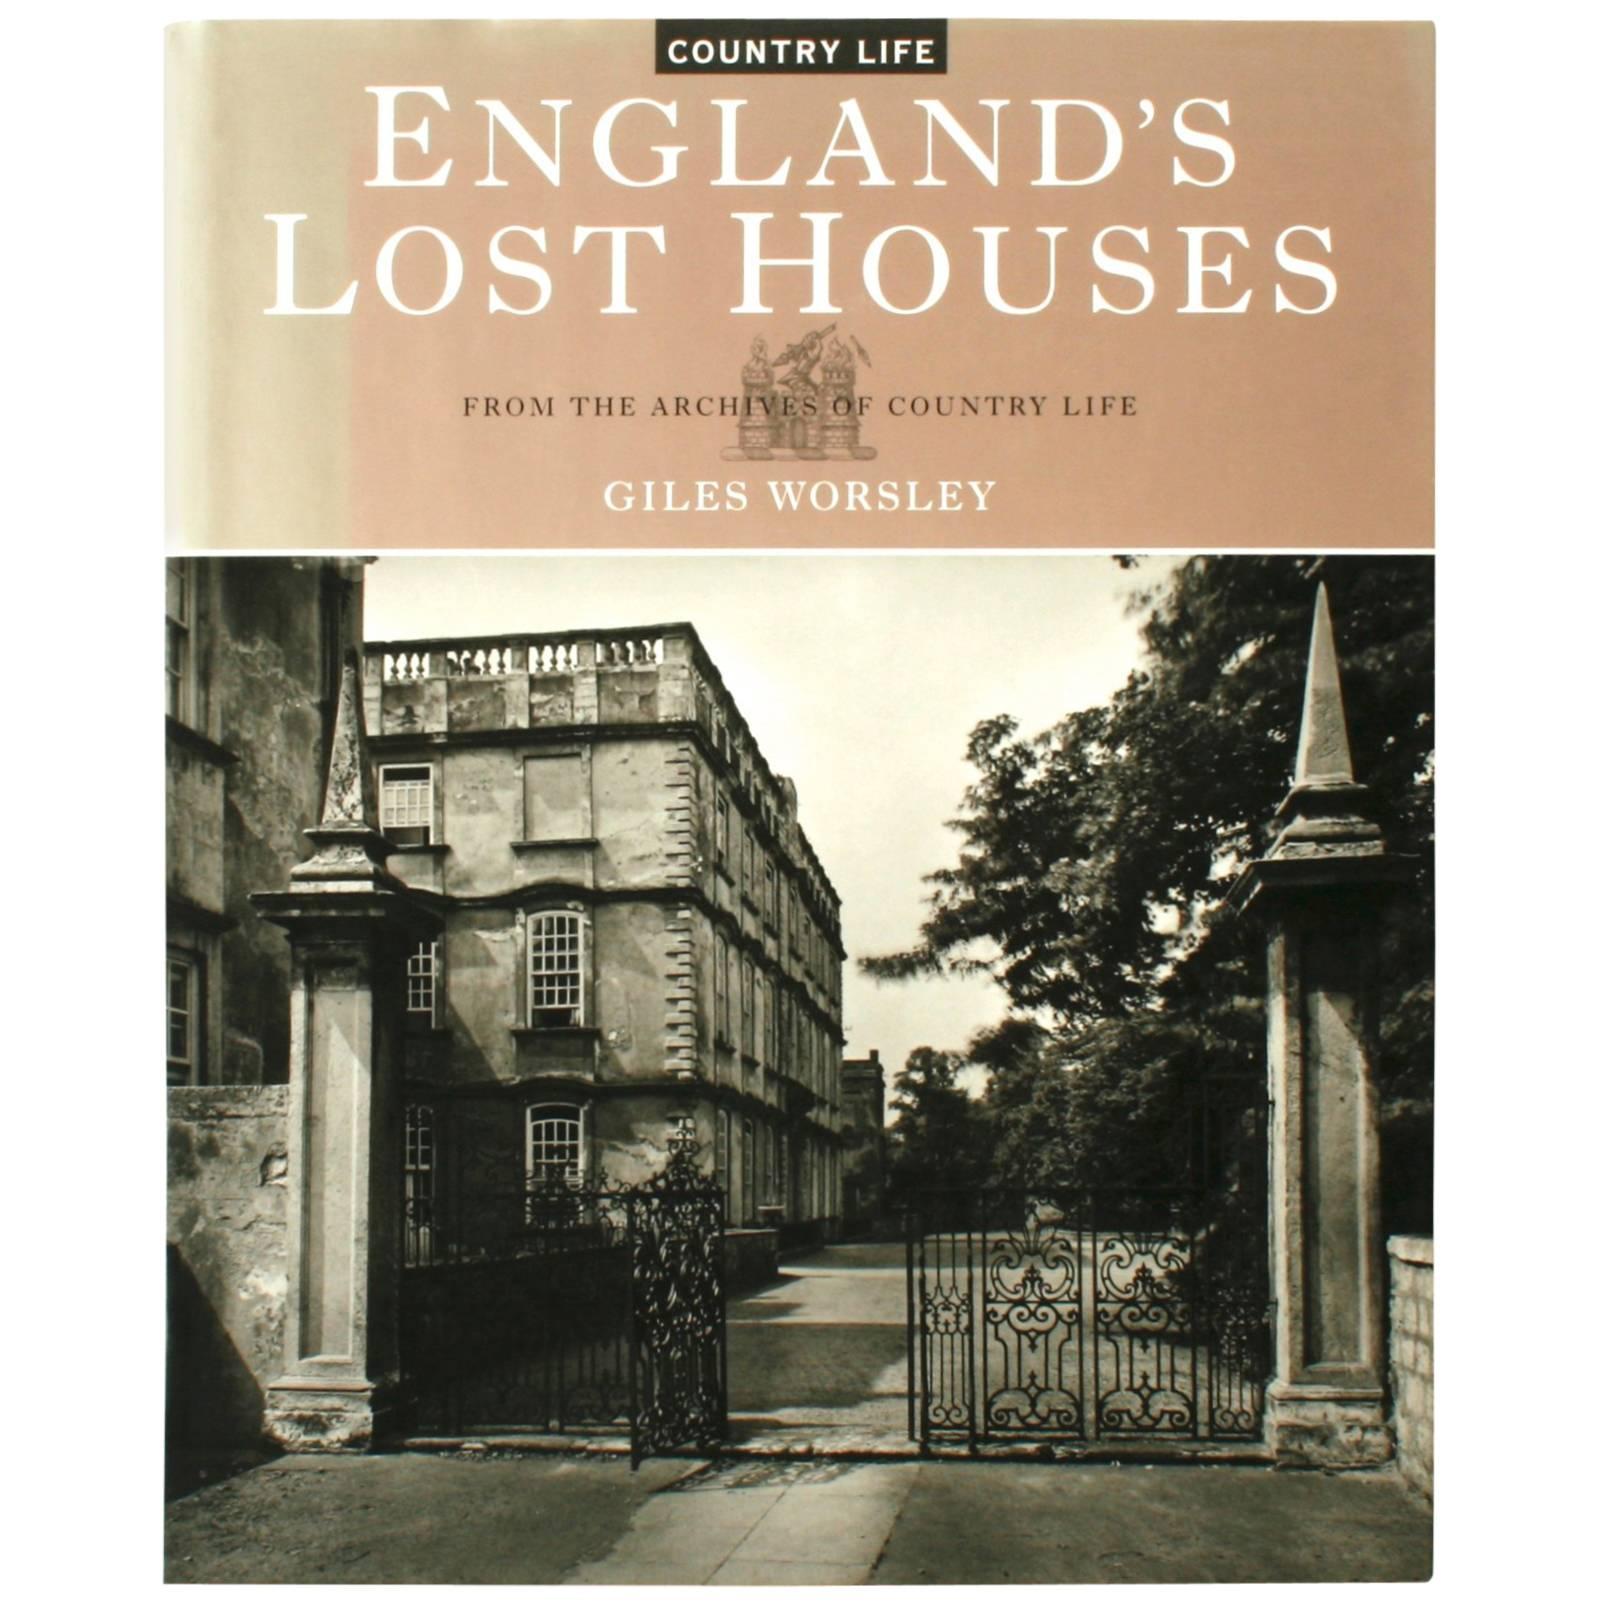 England's Lost Houses by Giles Worsley